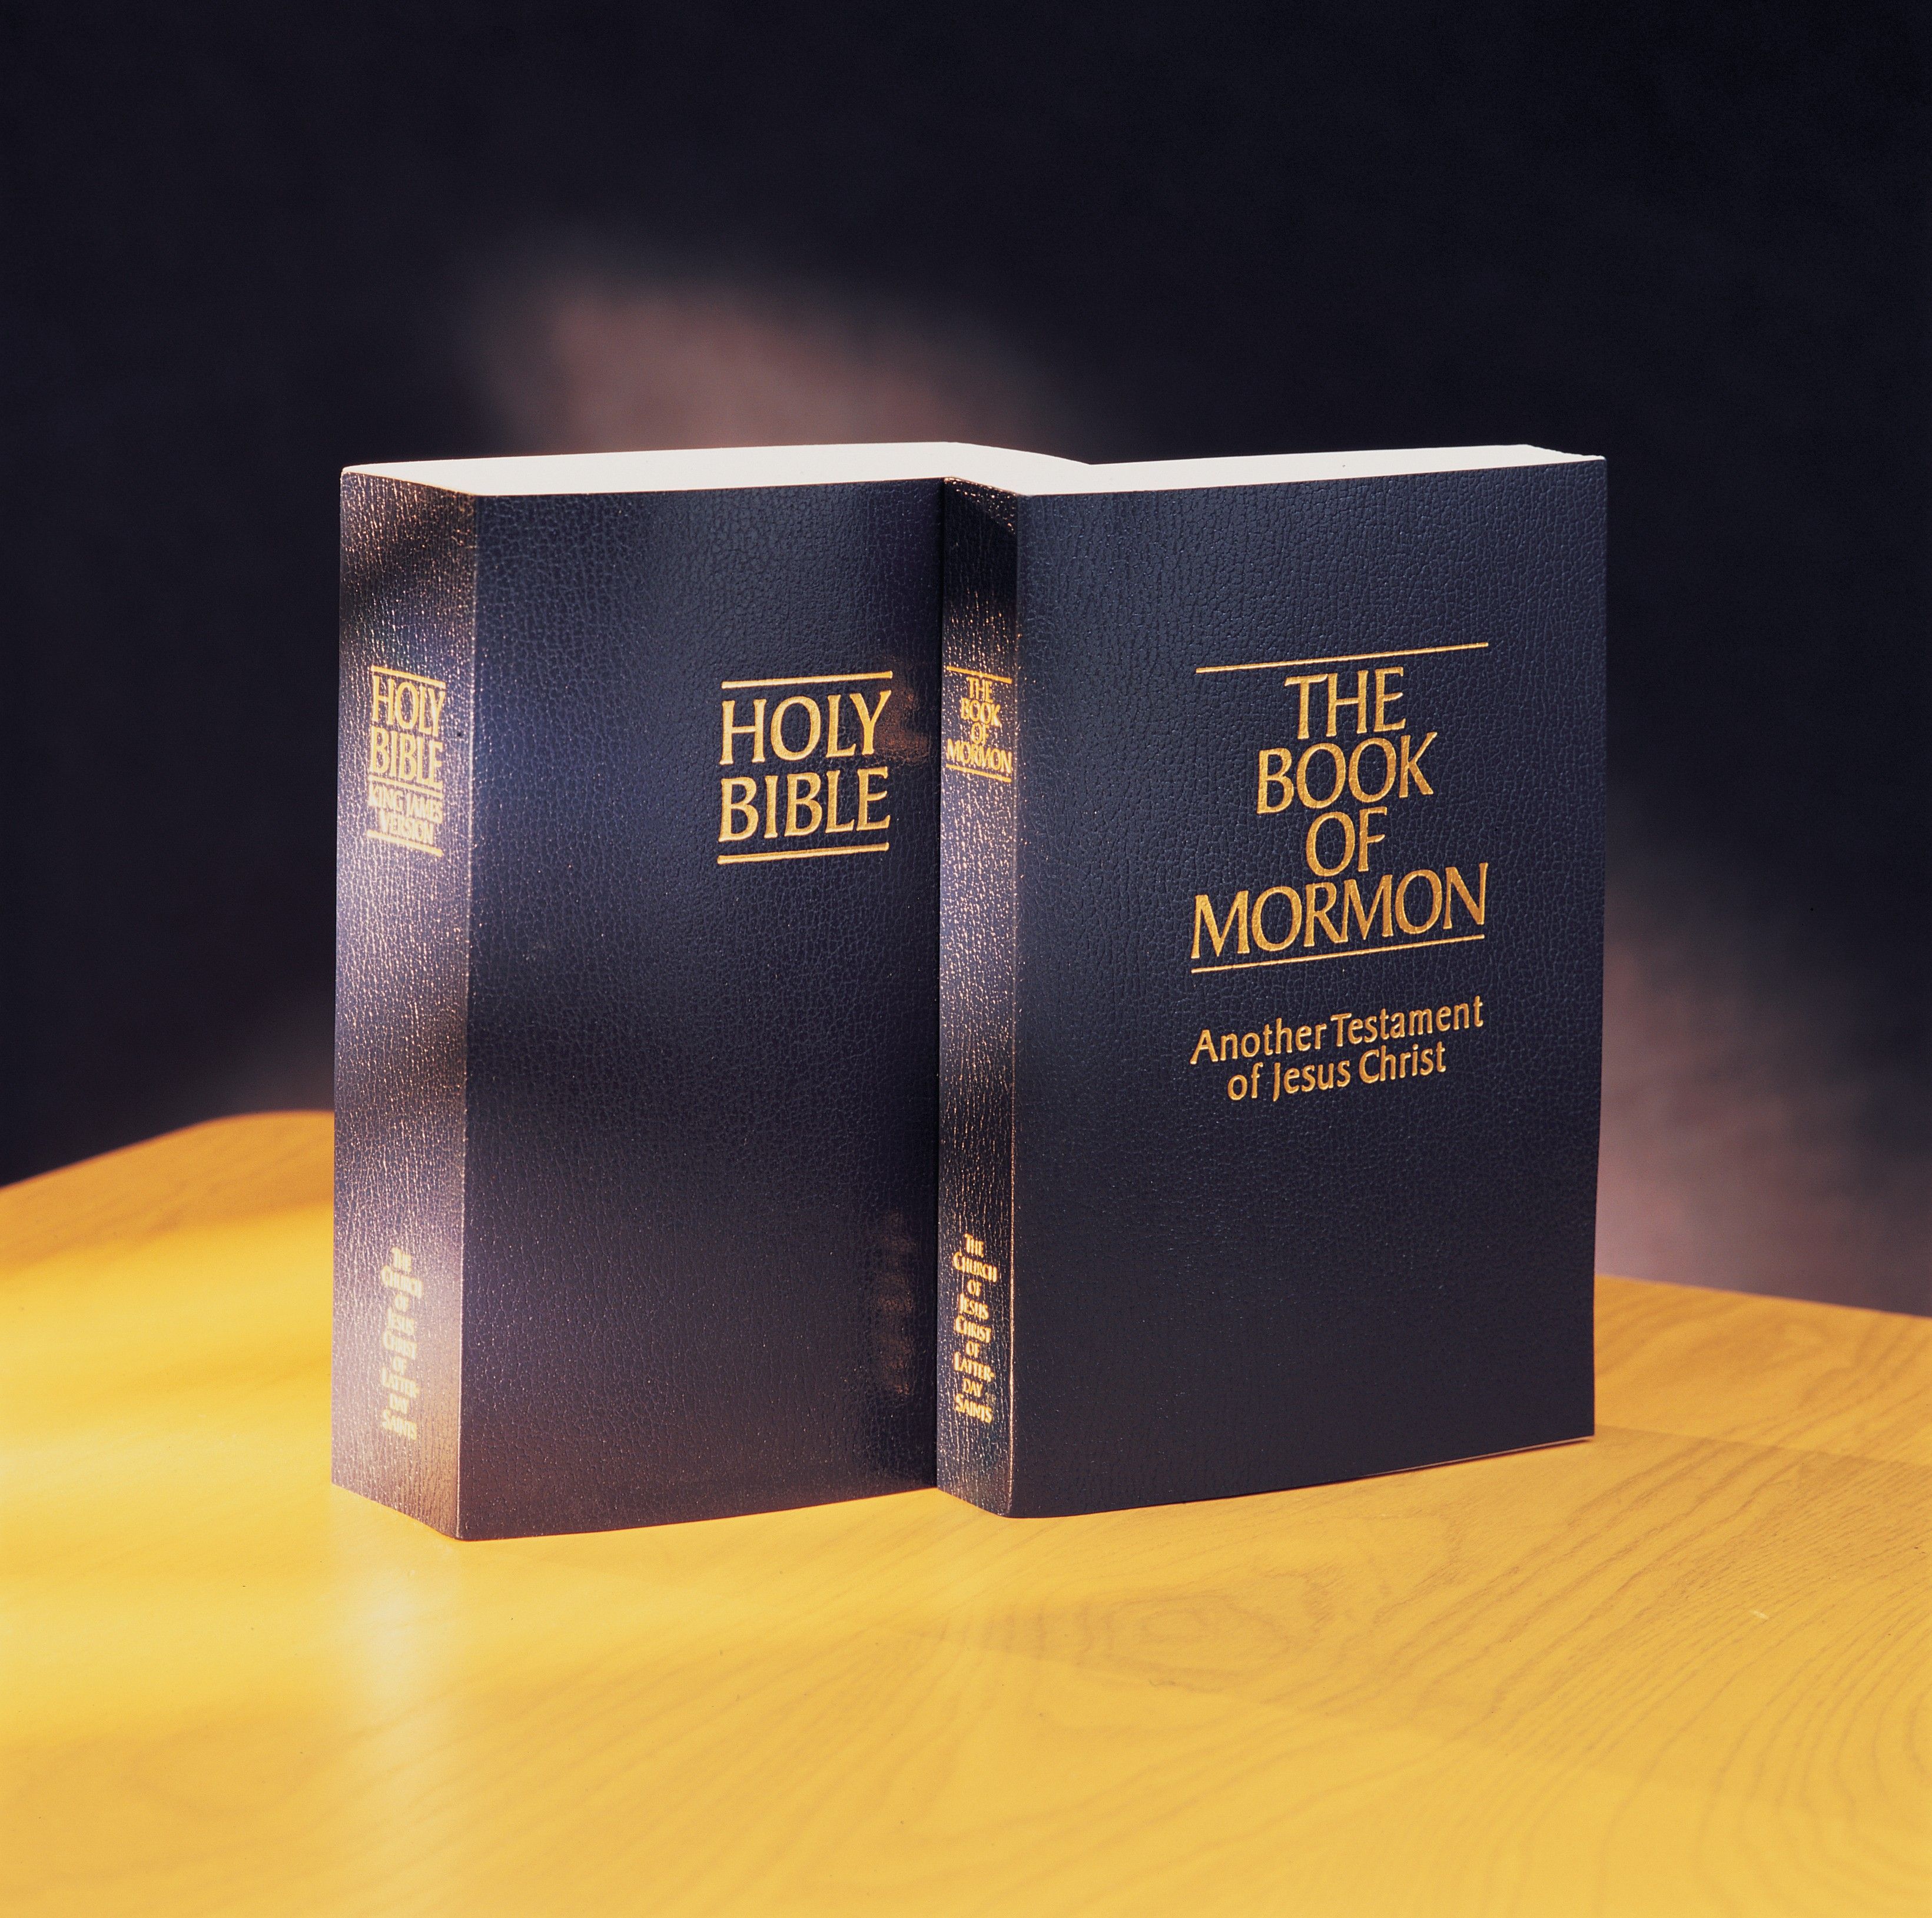 The Bible And Book Of Mormon